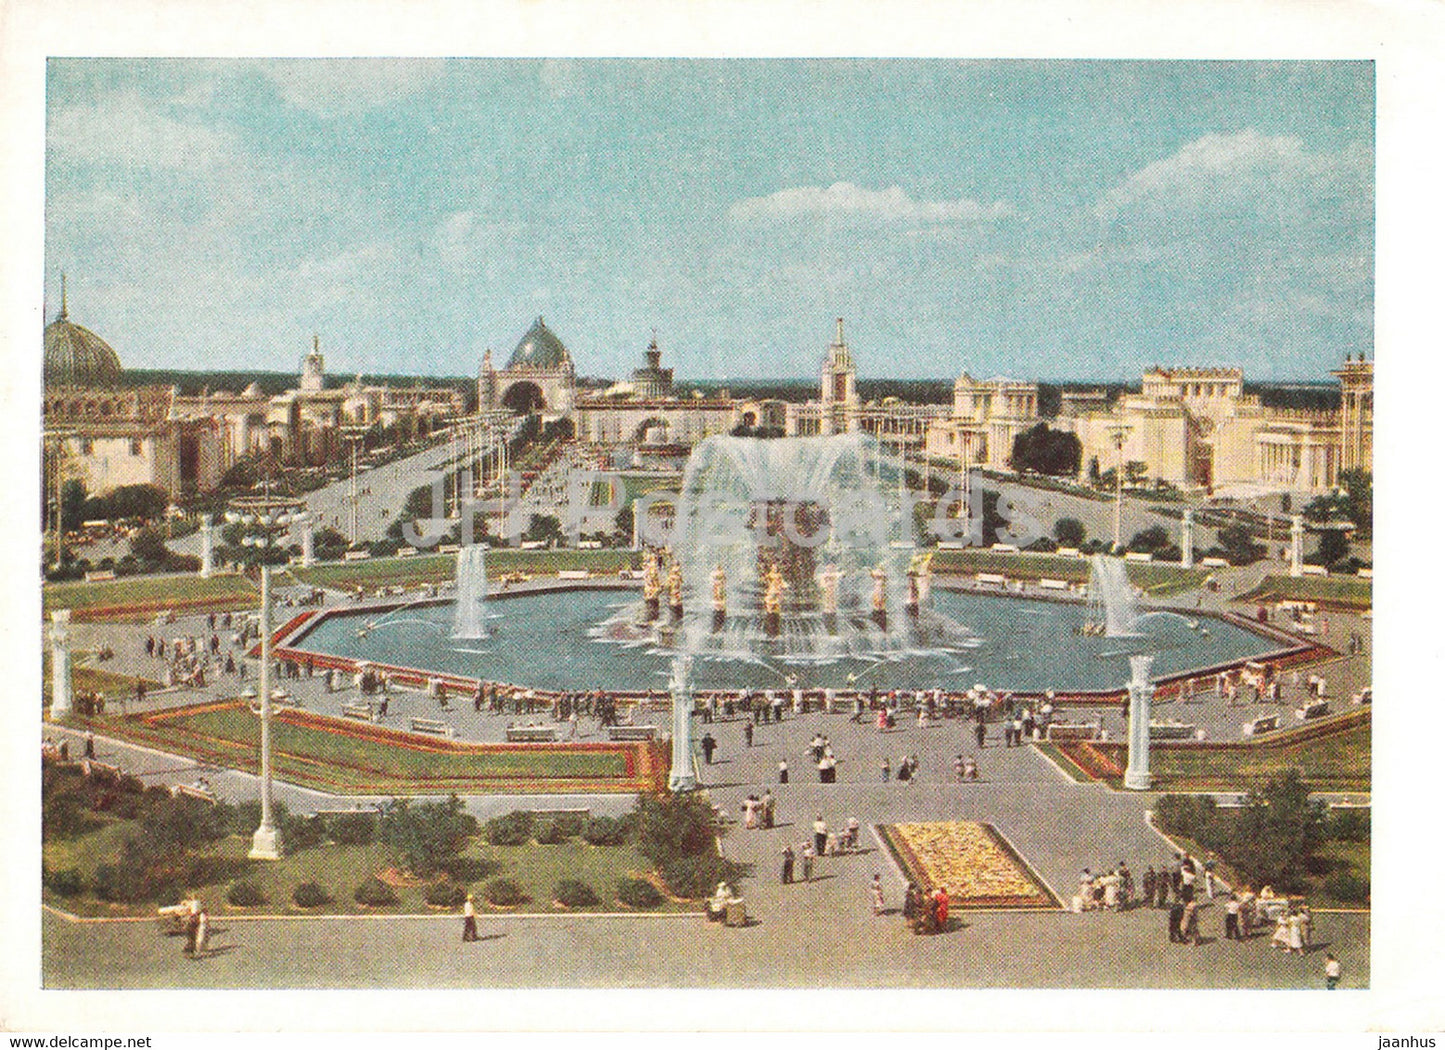 Moscow - VDNKh - Friendship of Peoples Square - postal stationery - 1959 - Russia USSR - unused - JH Postcards